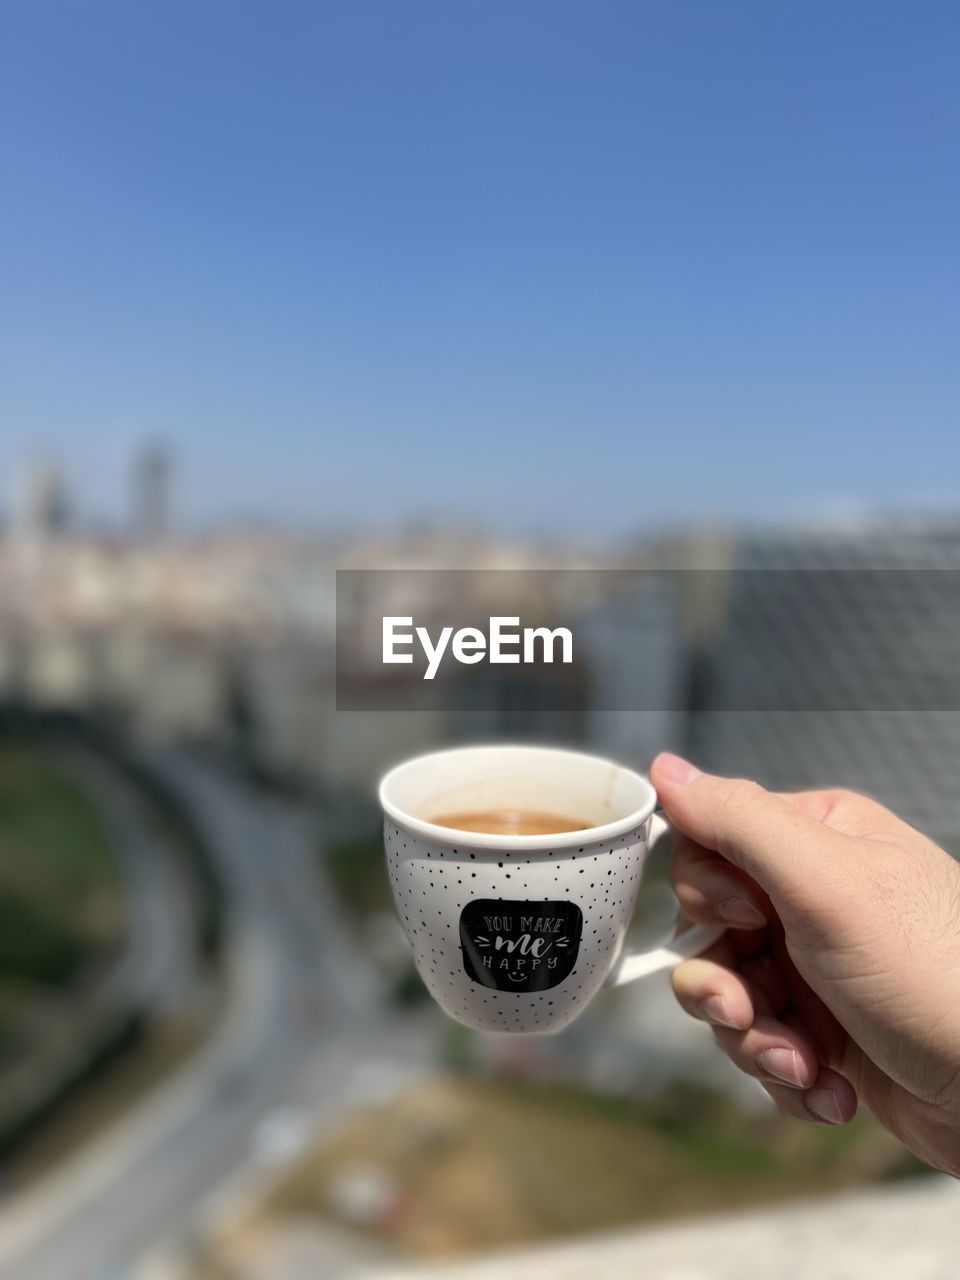 hand, drink, cup, one person, holding, coffee, food and drink, refreshment, mug, architecture, coffee cup, focus on foreground, city, sky, adult, day, copy space, clear sky, built structure, building exterior, close-up, nature, outdoors, hot drink, lifestyles